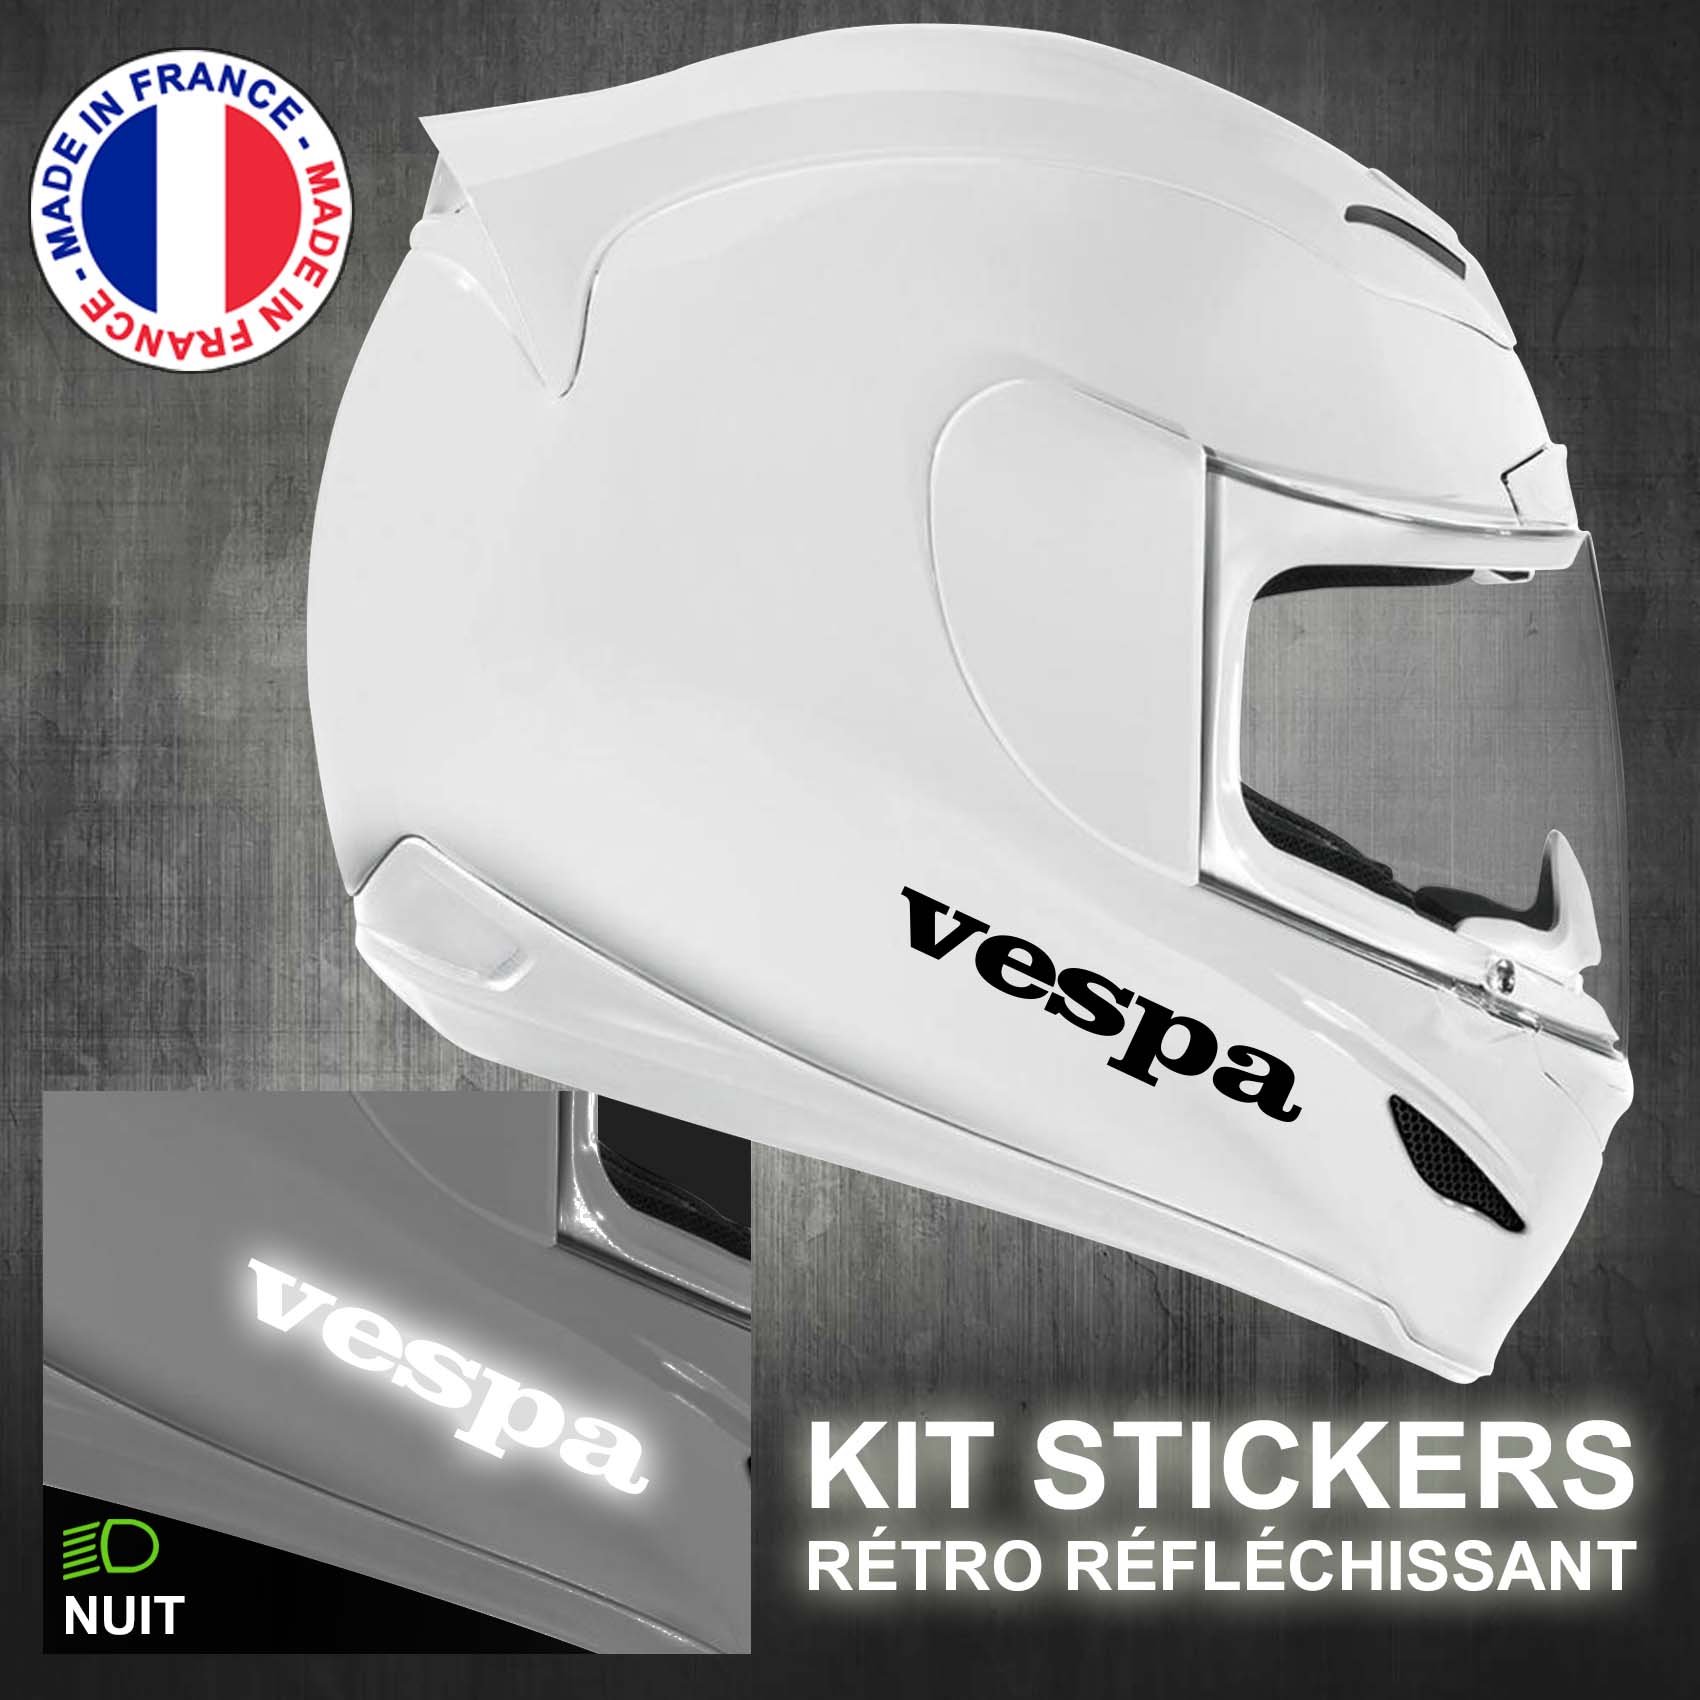 stickers-casque-moto-vespa-ref1-retro-reflechissant-autocollant-moto-velo-tuning-racing-route-sticker-casques-adhesif-scooter-nuit-securite-decals-personnalise-personnalisable-min